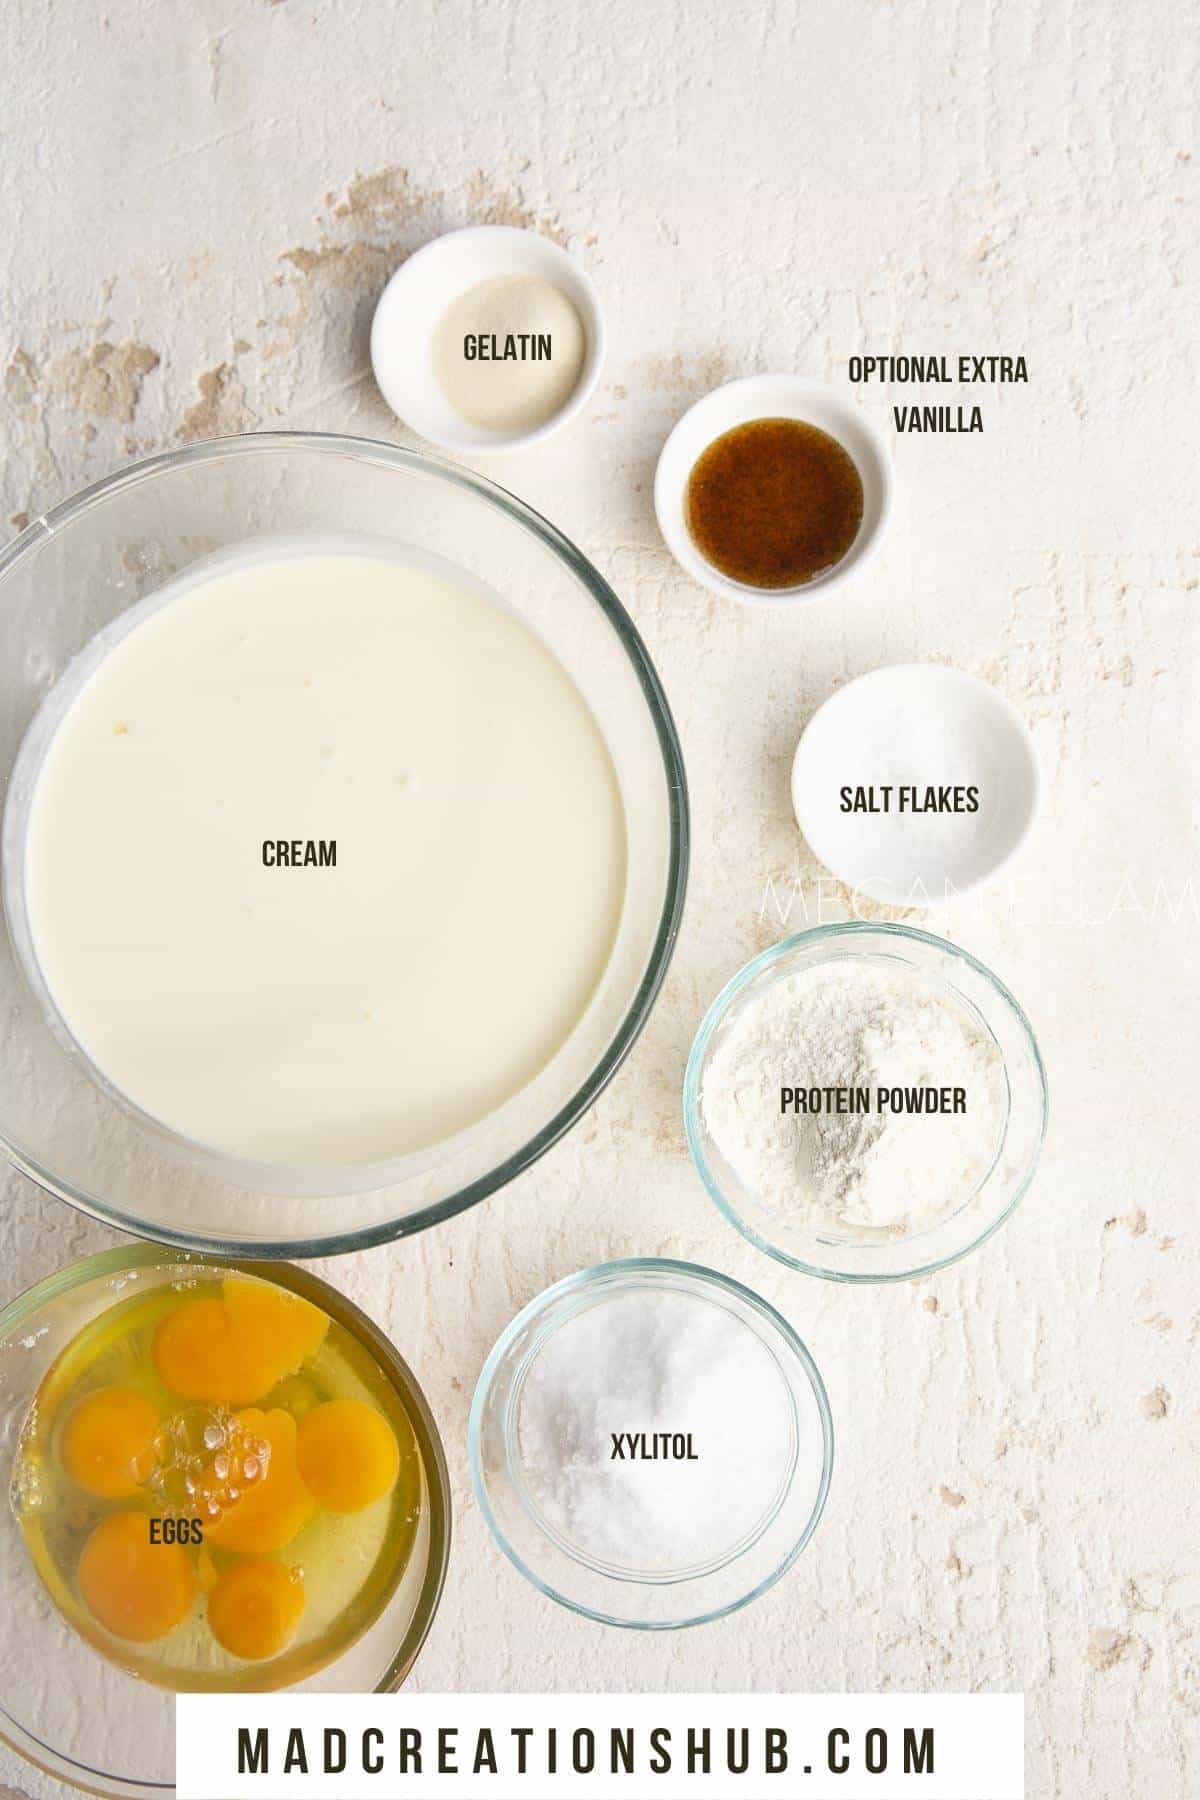 All the ingredients for ice cream bars in small bowls with the label for each ingredient.